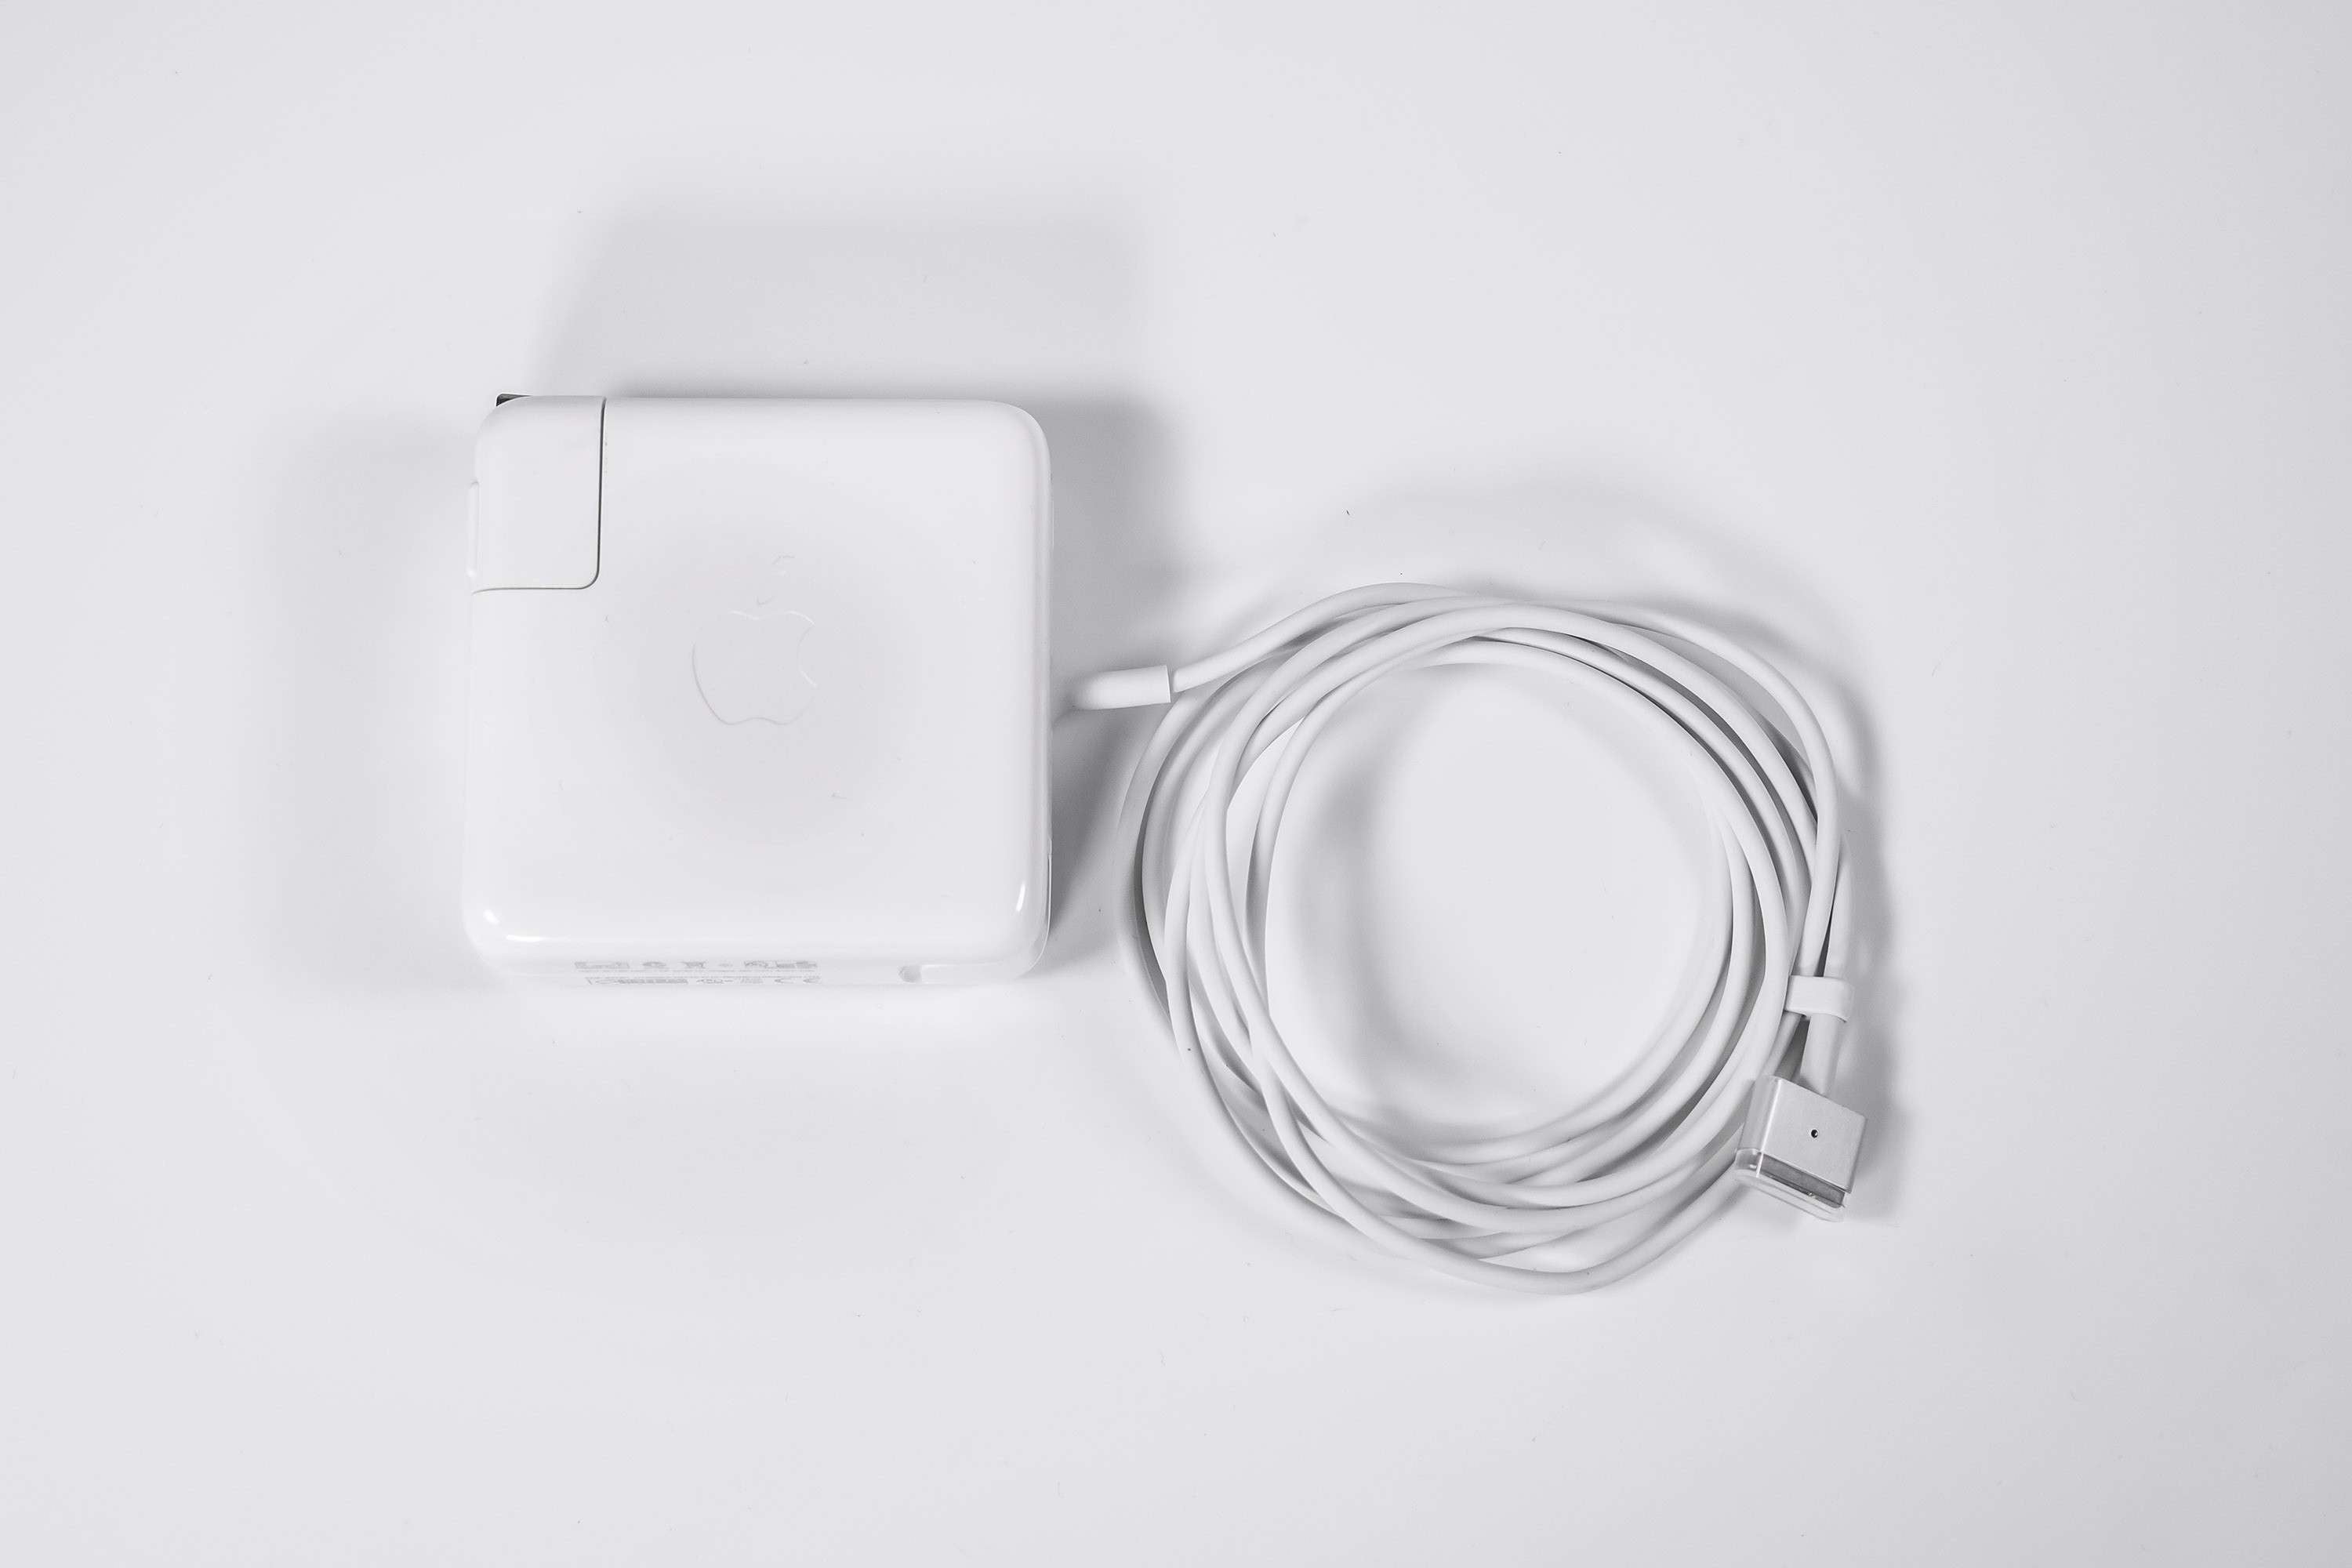 Pre-Owned Apple 60W MagSafe 2 Power Adapter (A1435) With 3-Prong Cable Only  (Refurbished: Good) 